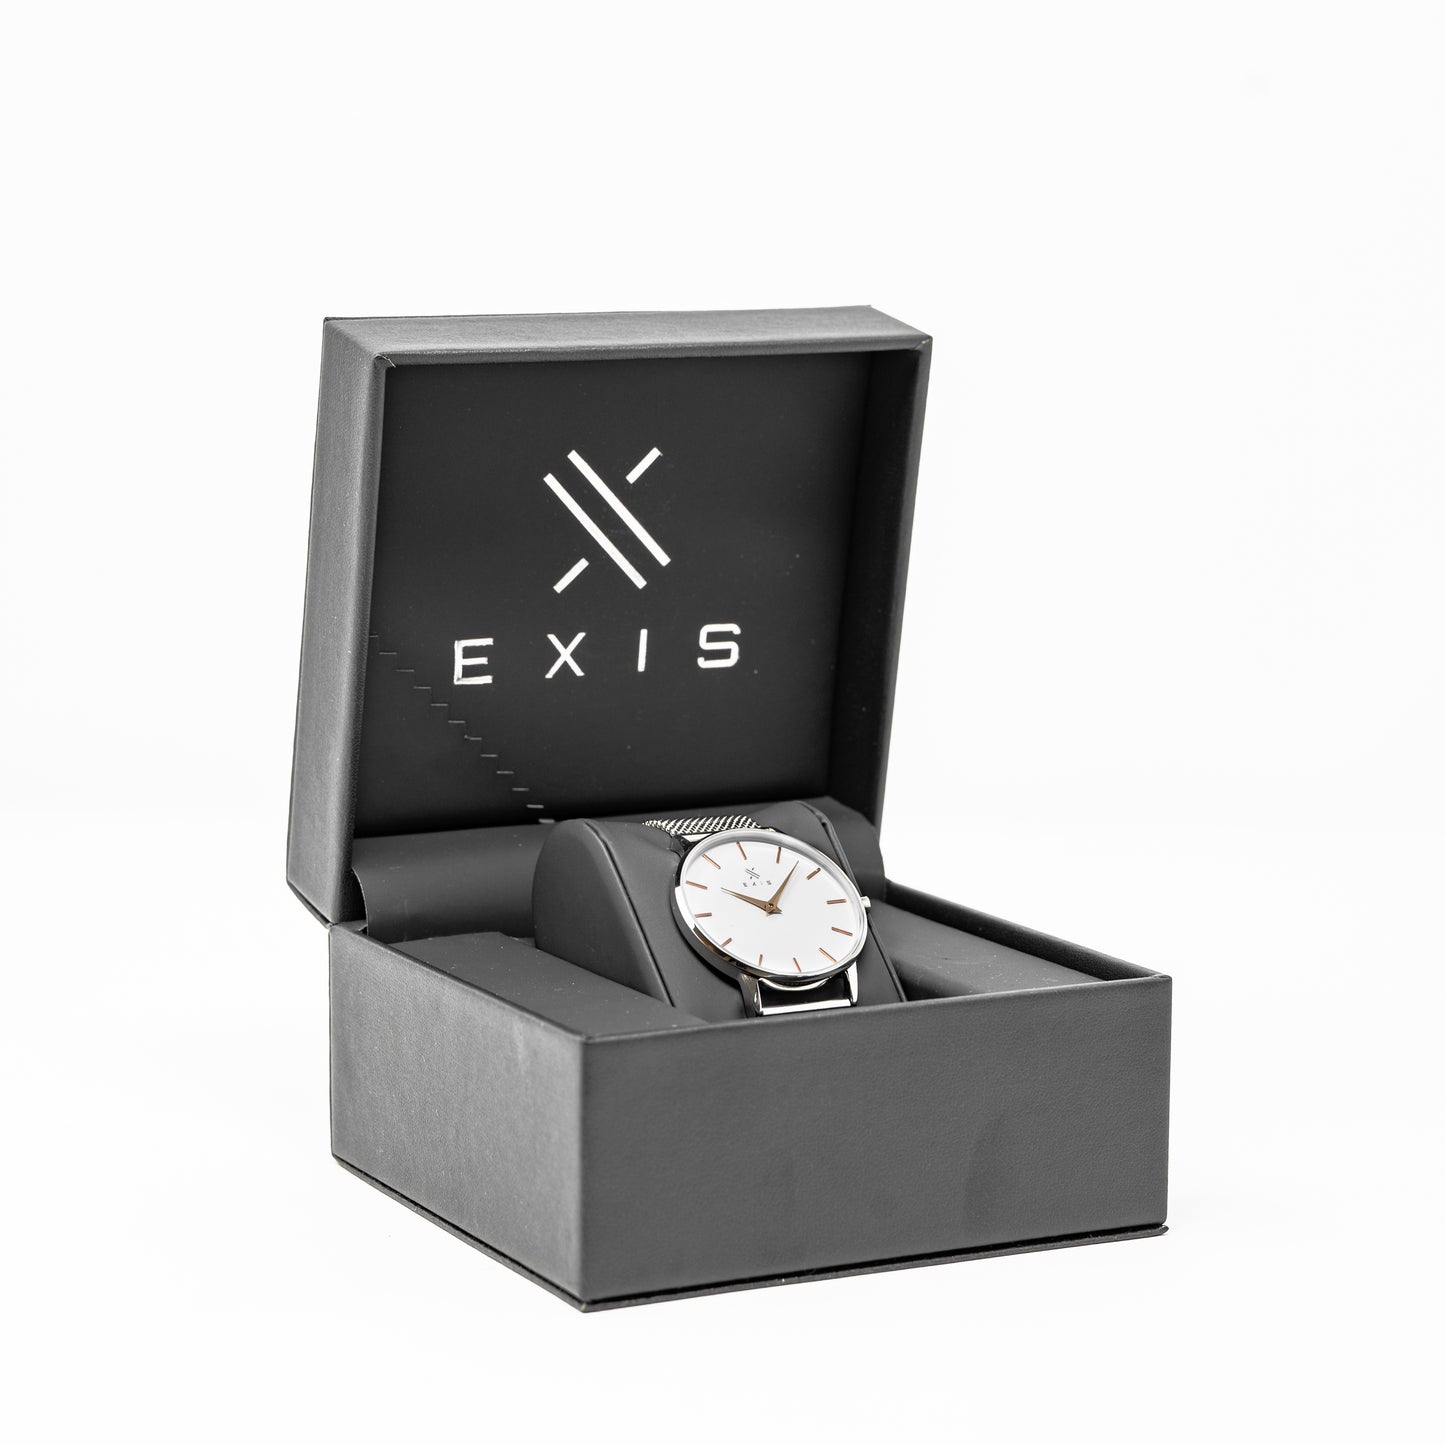 ADVANCED - Exis watches